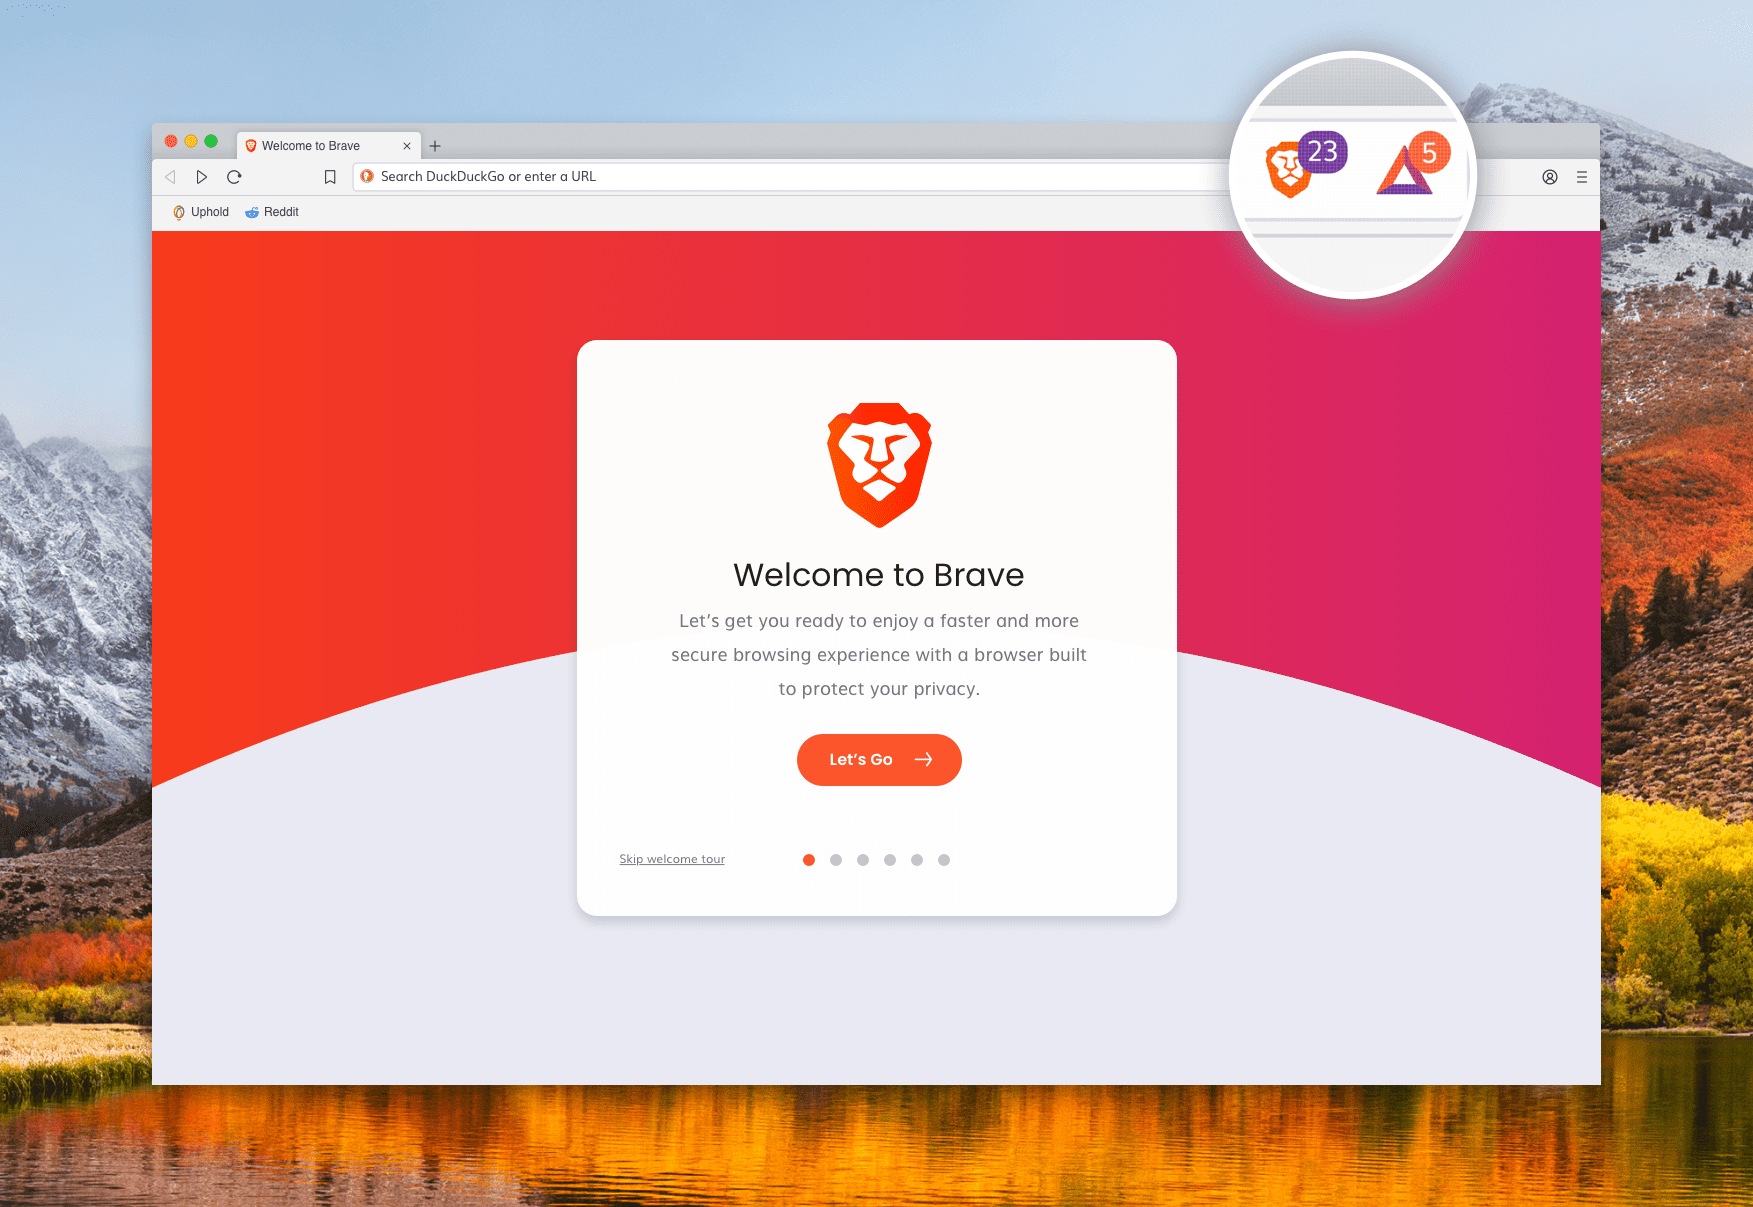 This picture is from the Brave Browser website